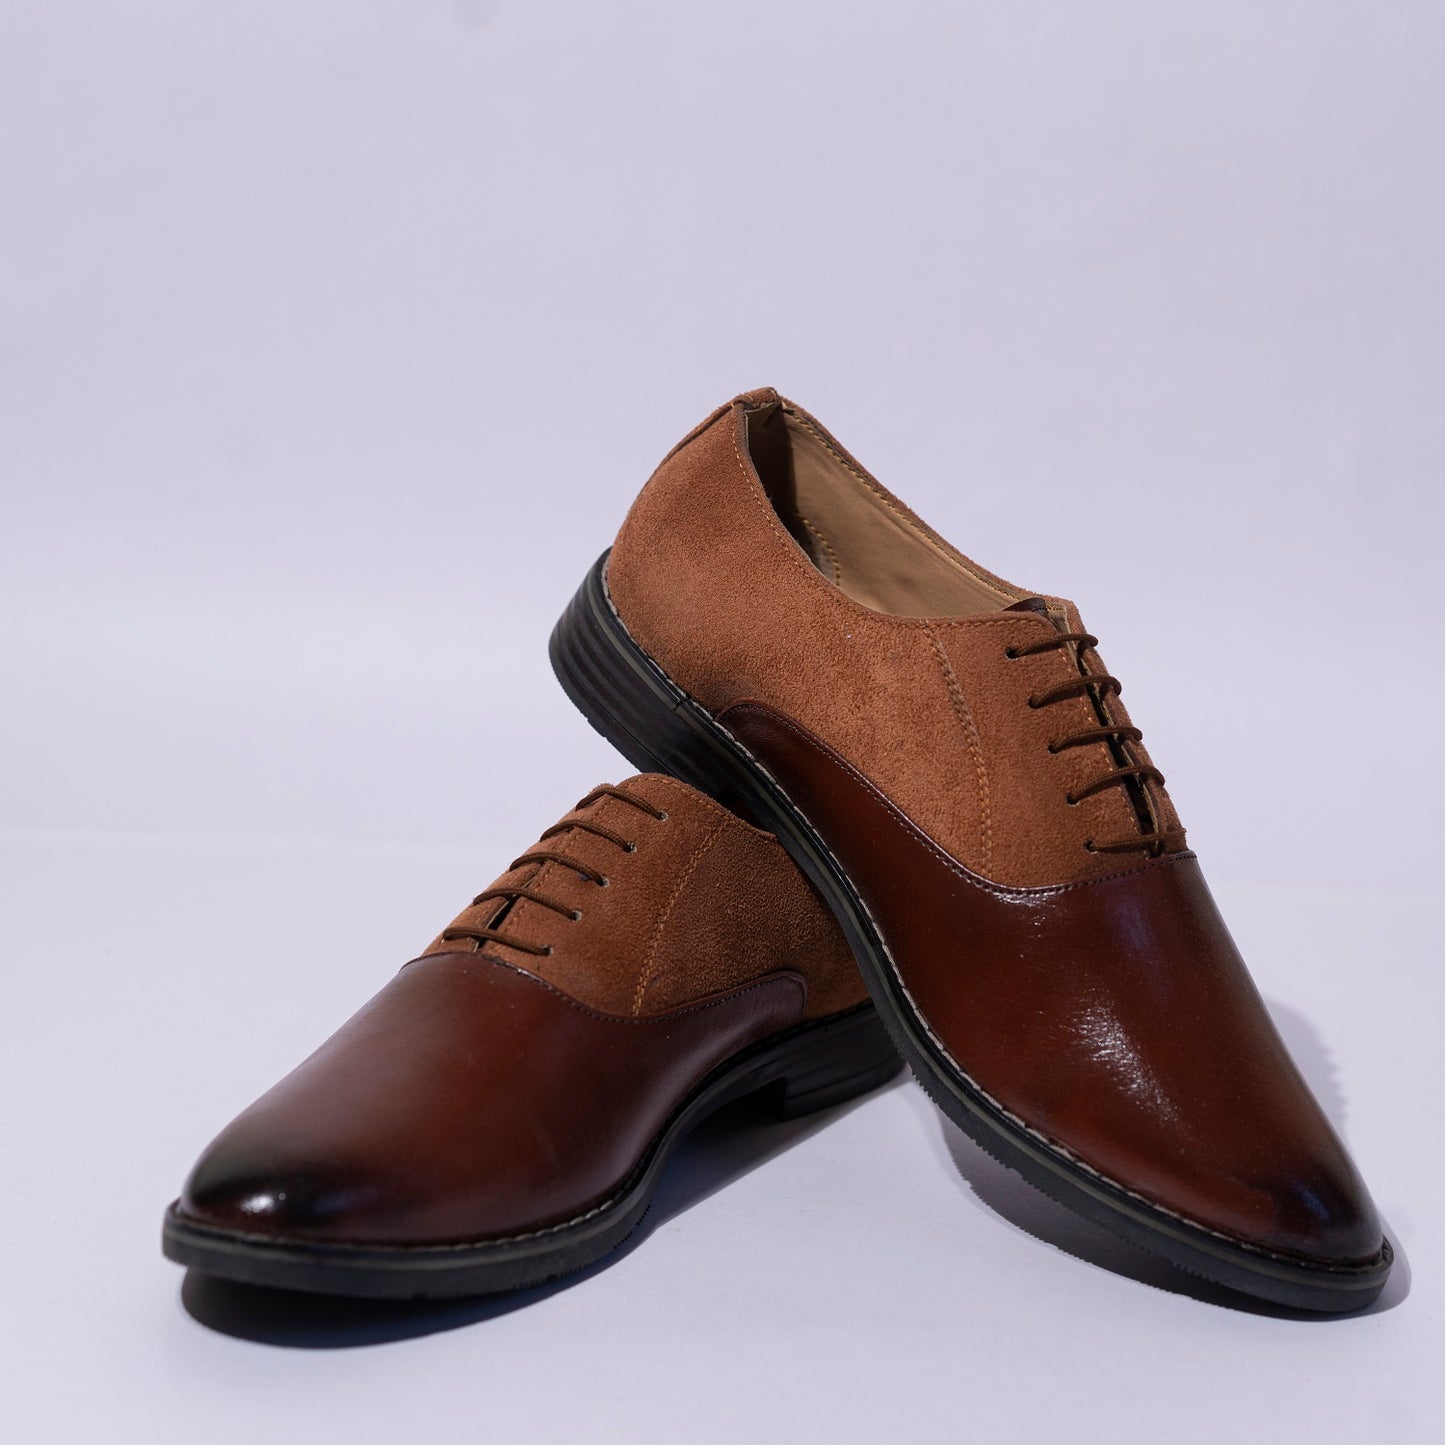 The Aurous Stride Laceup Formal Shoes - Tan